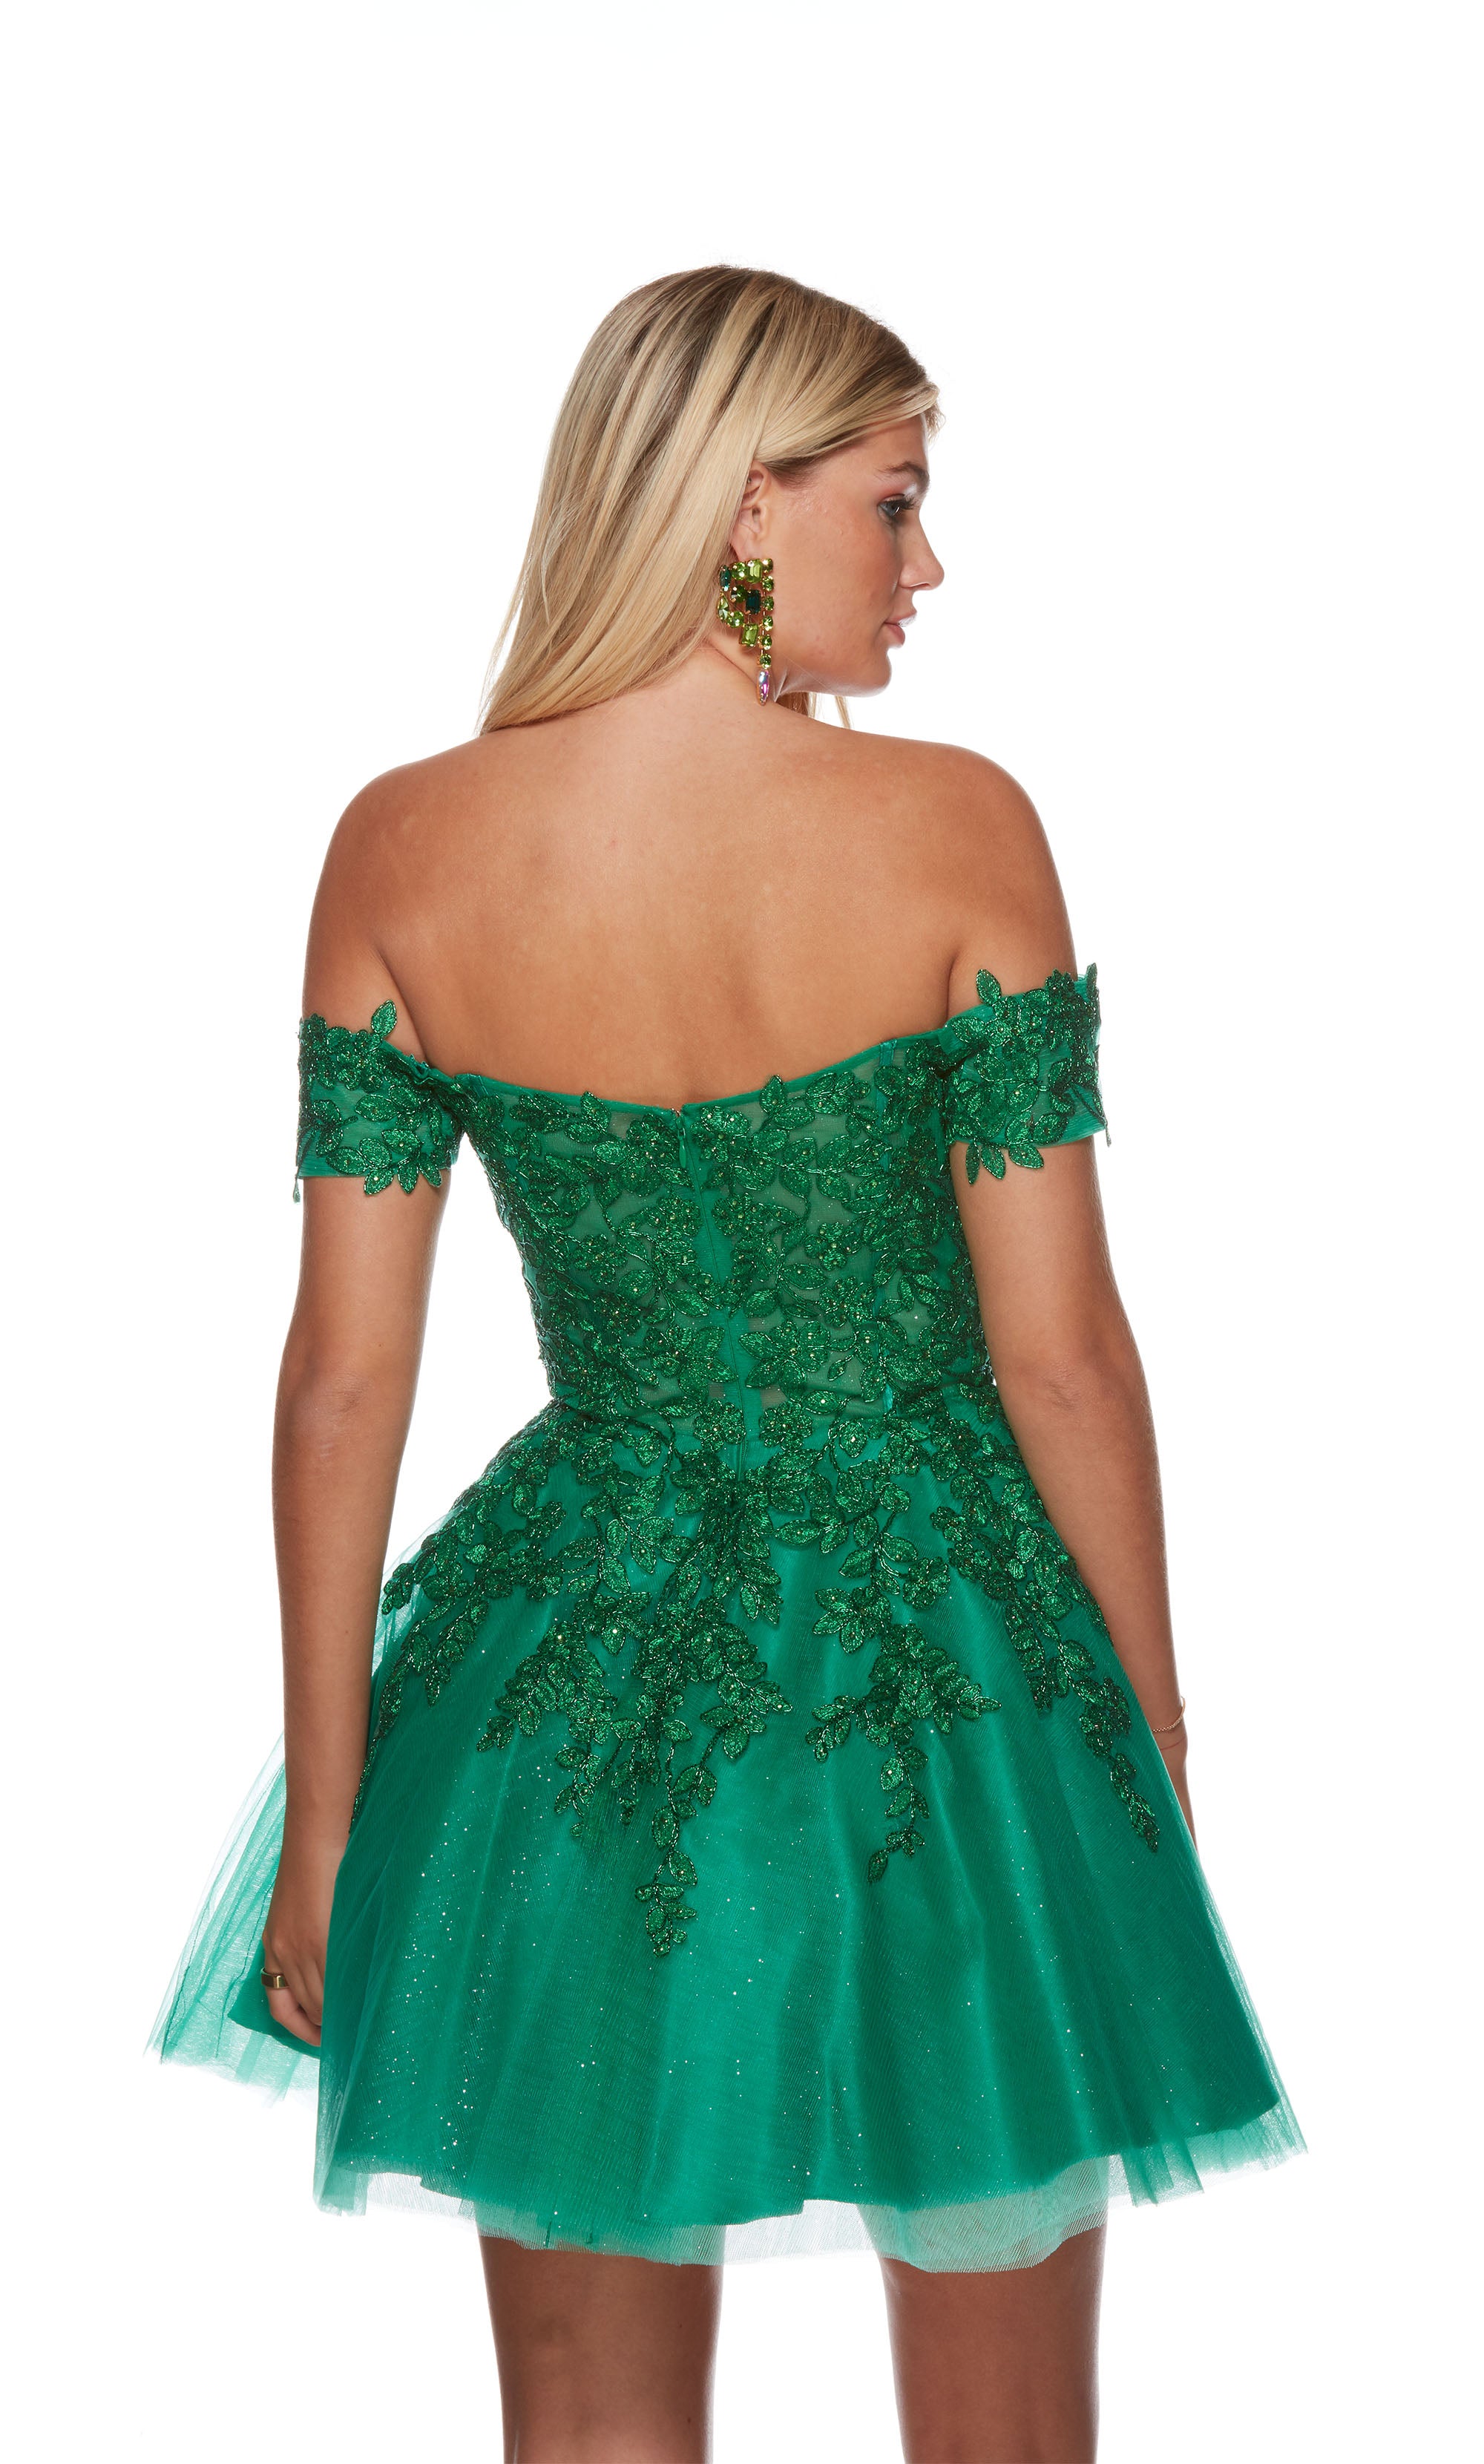 A playful emerald green short party dress featuring an off the shoulder neckline, a sheer bodice adorned with floral lace appliques, and a glitter-tulle skirt.